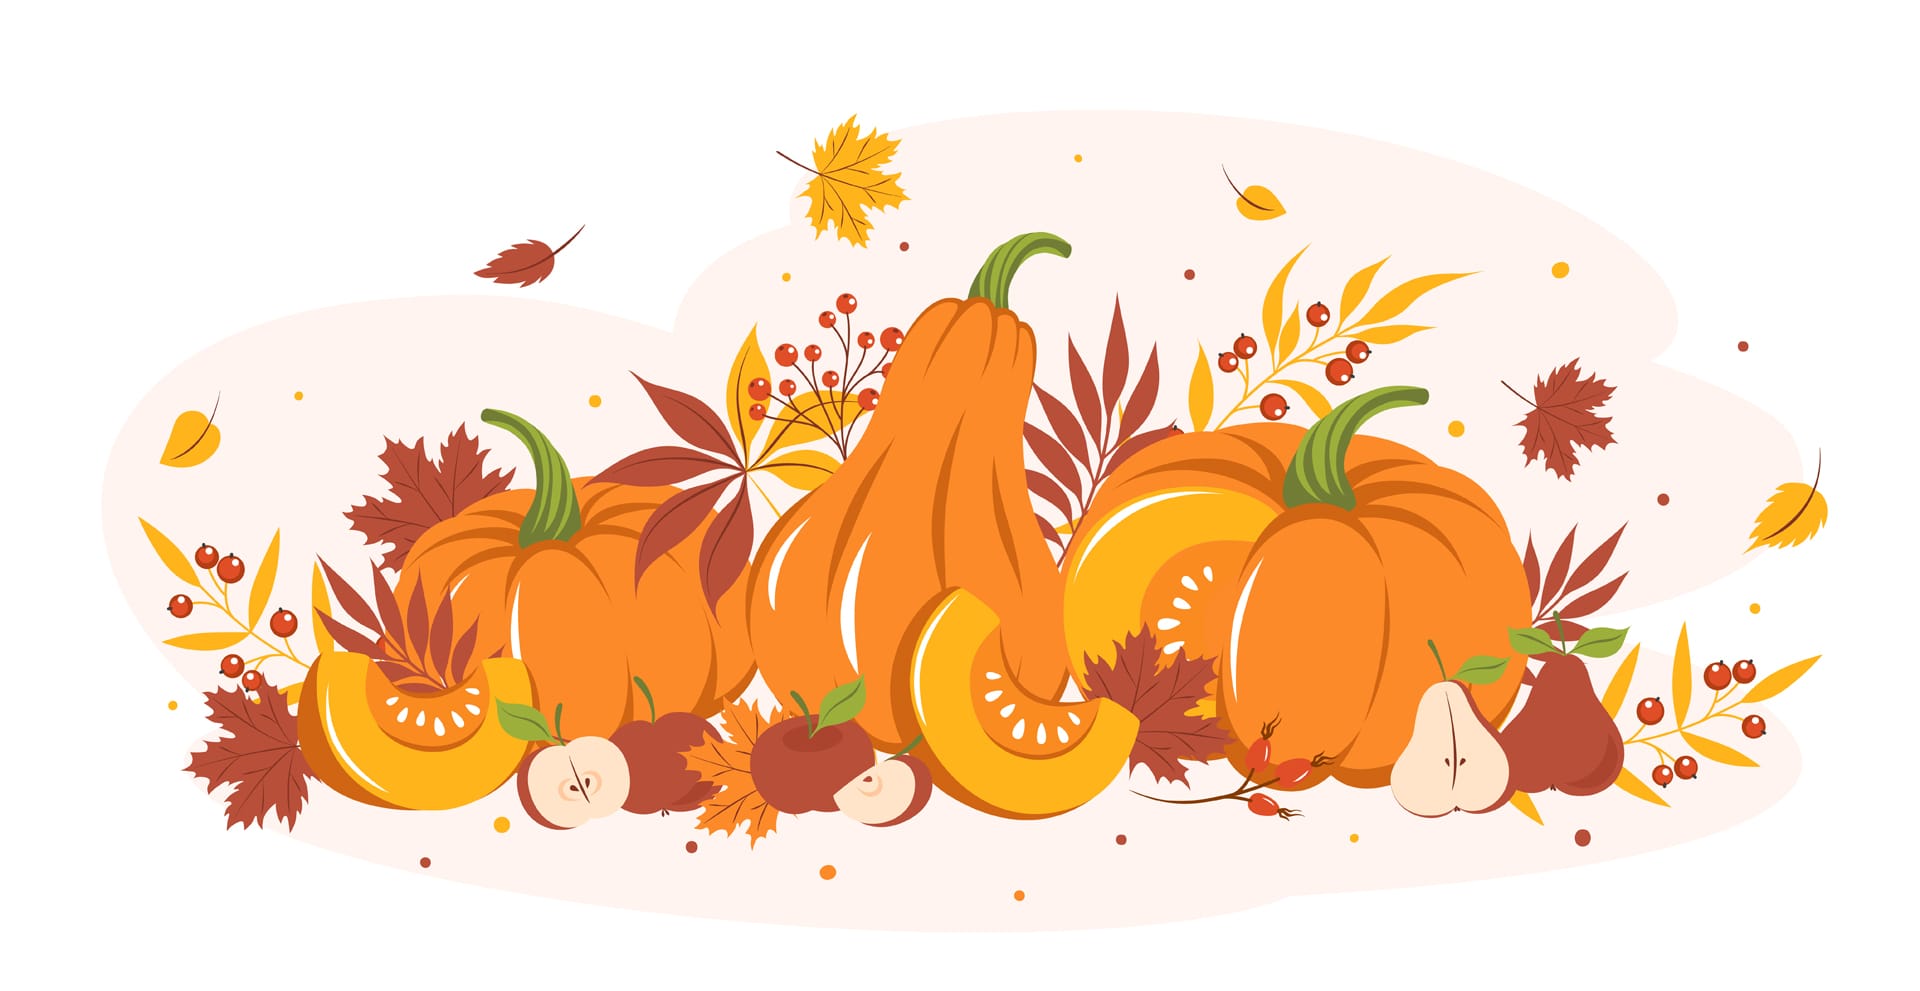 Card design with autumn colorful leaves pumpkin fruit happy thanksgiving